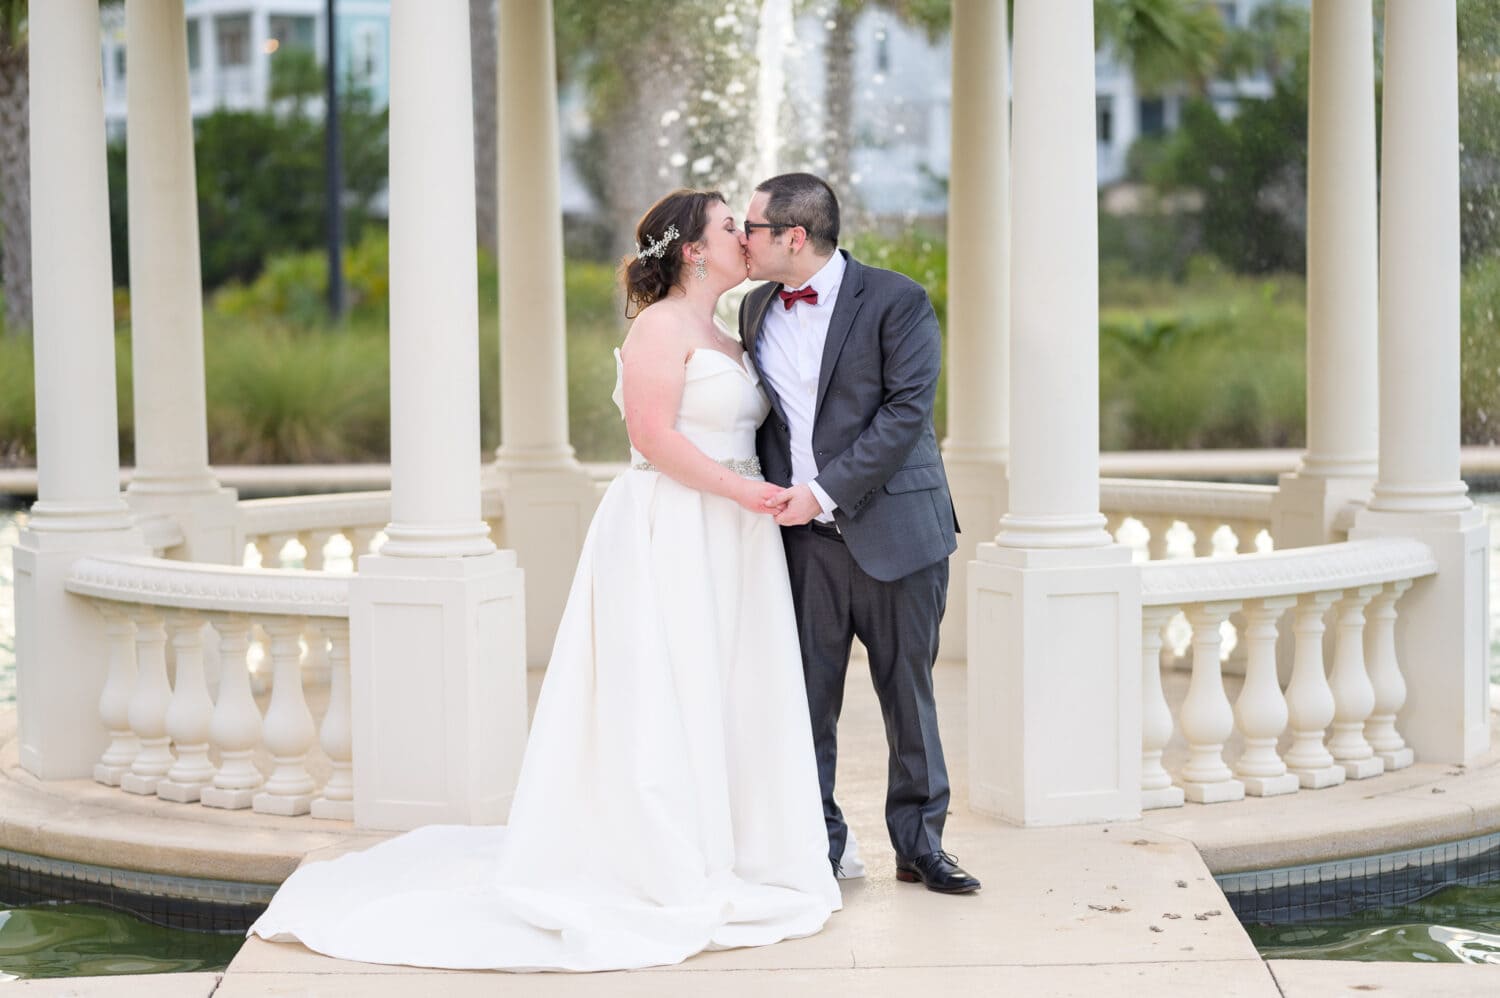 Kiss in front of the gazebo  - 21 Main Events at North Beach